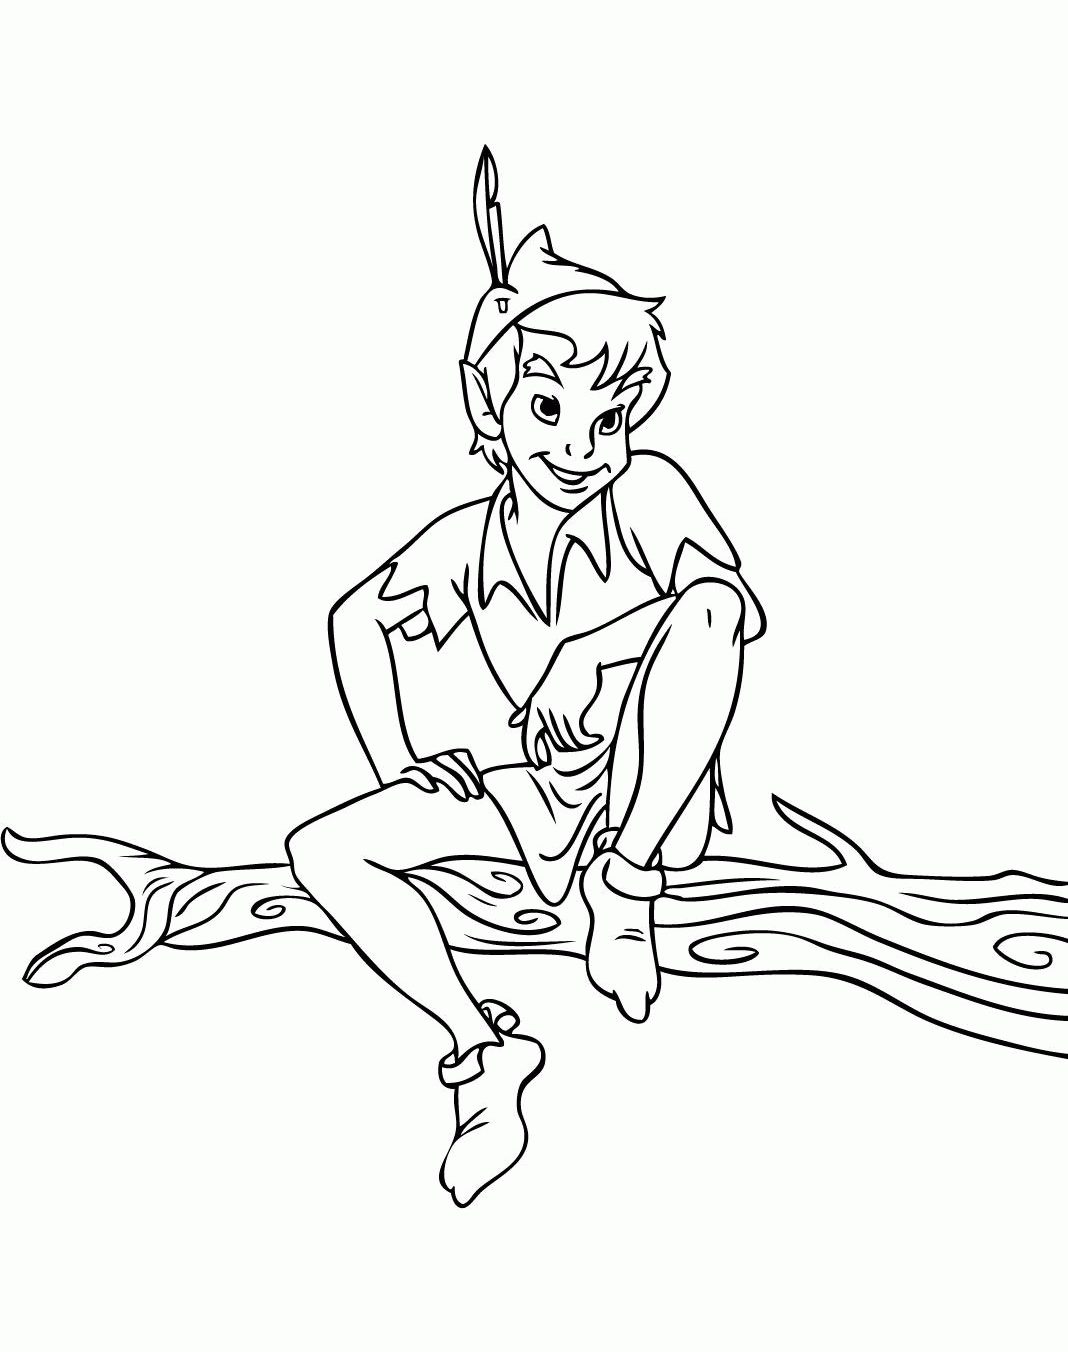 6 Pics of Peter Pan Wendy Coloring Pages - Peter Pan Flying ...